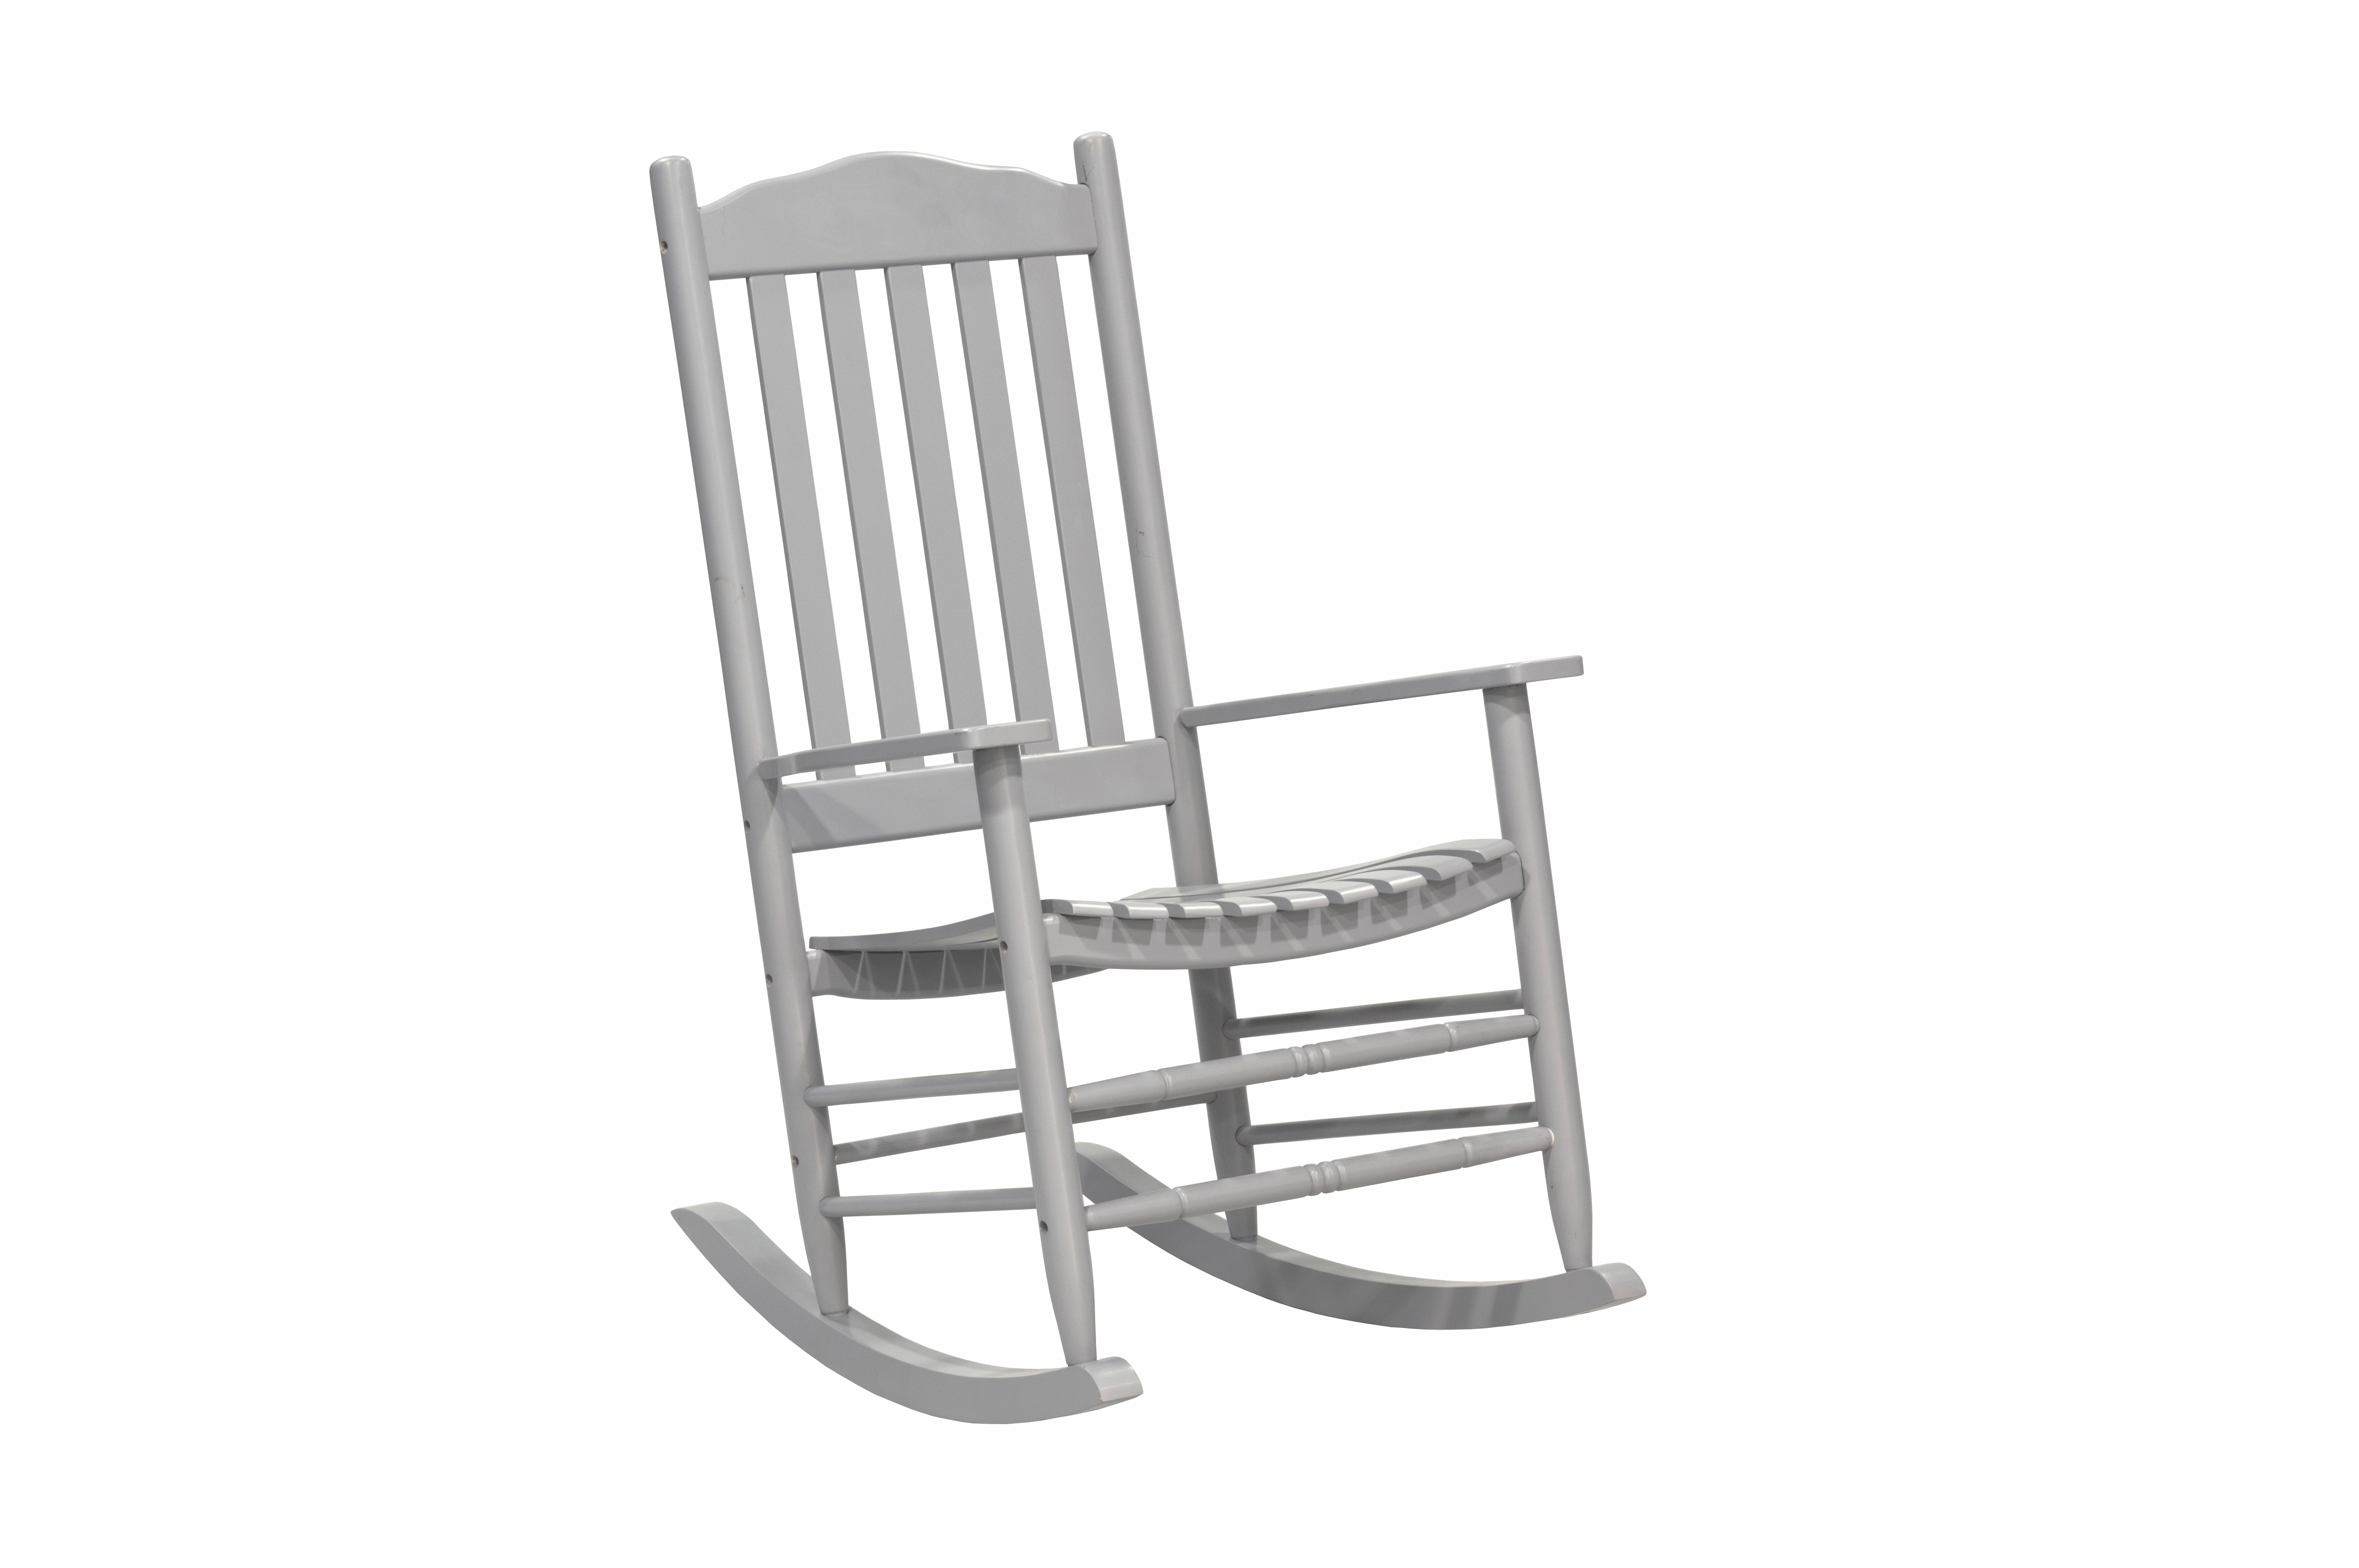 Outdoor Patio Garden Furniture 3-Piece Wood Porch Rocking Chair Set, Weather Resistant Finish, 2 Rocking Chairs and 1 Side Table - Gray - image 5 of 11